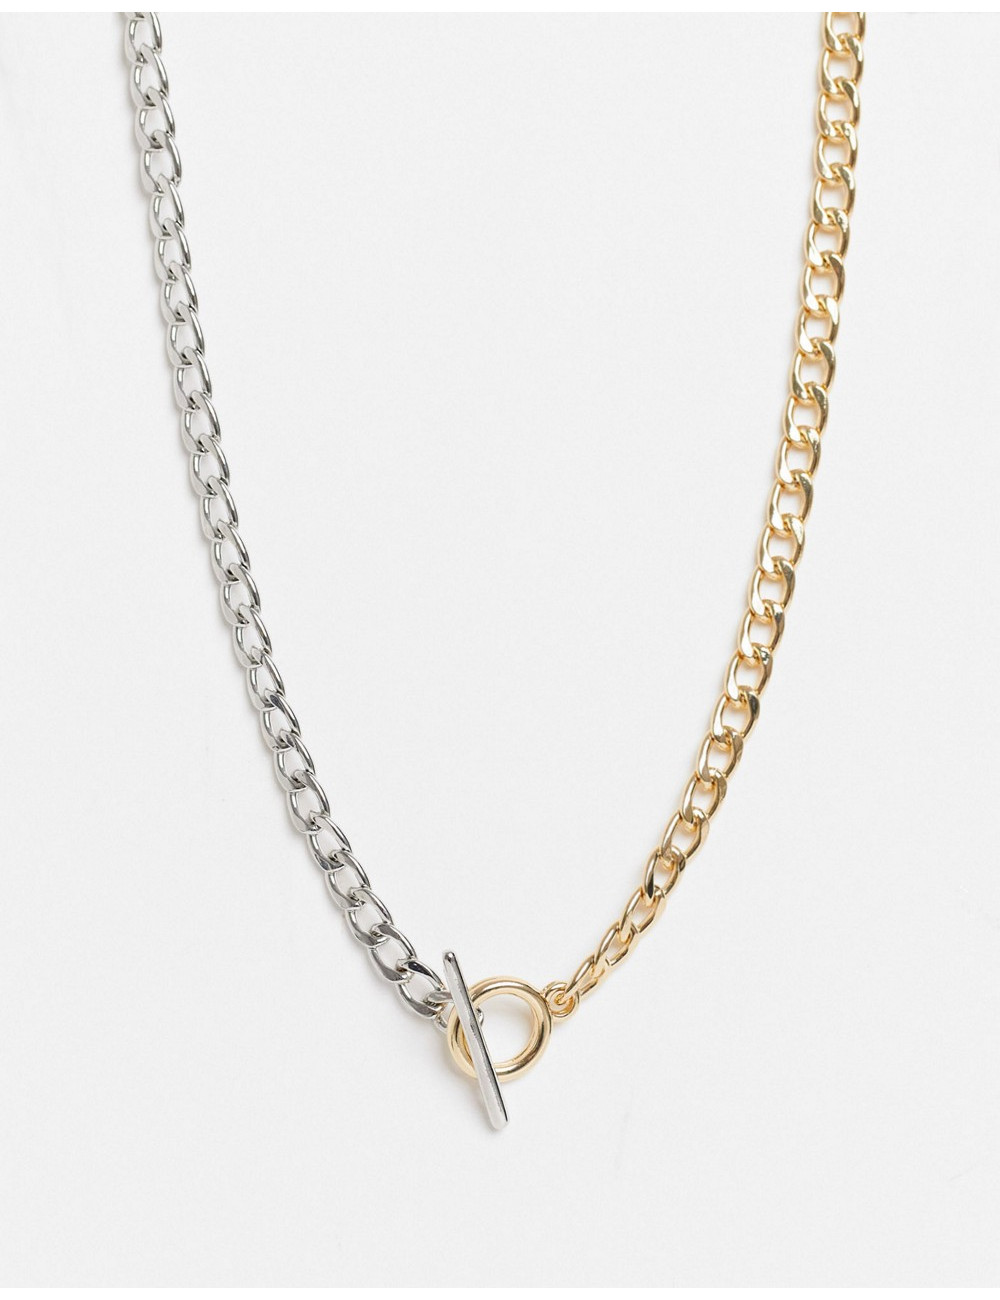 Topshop necklace with t-bar...